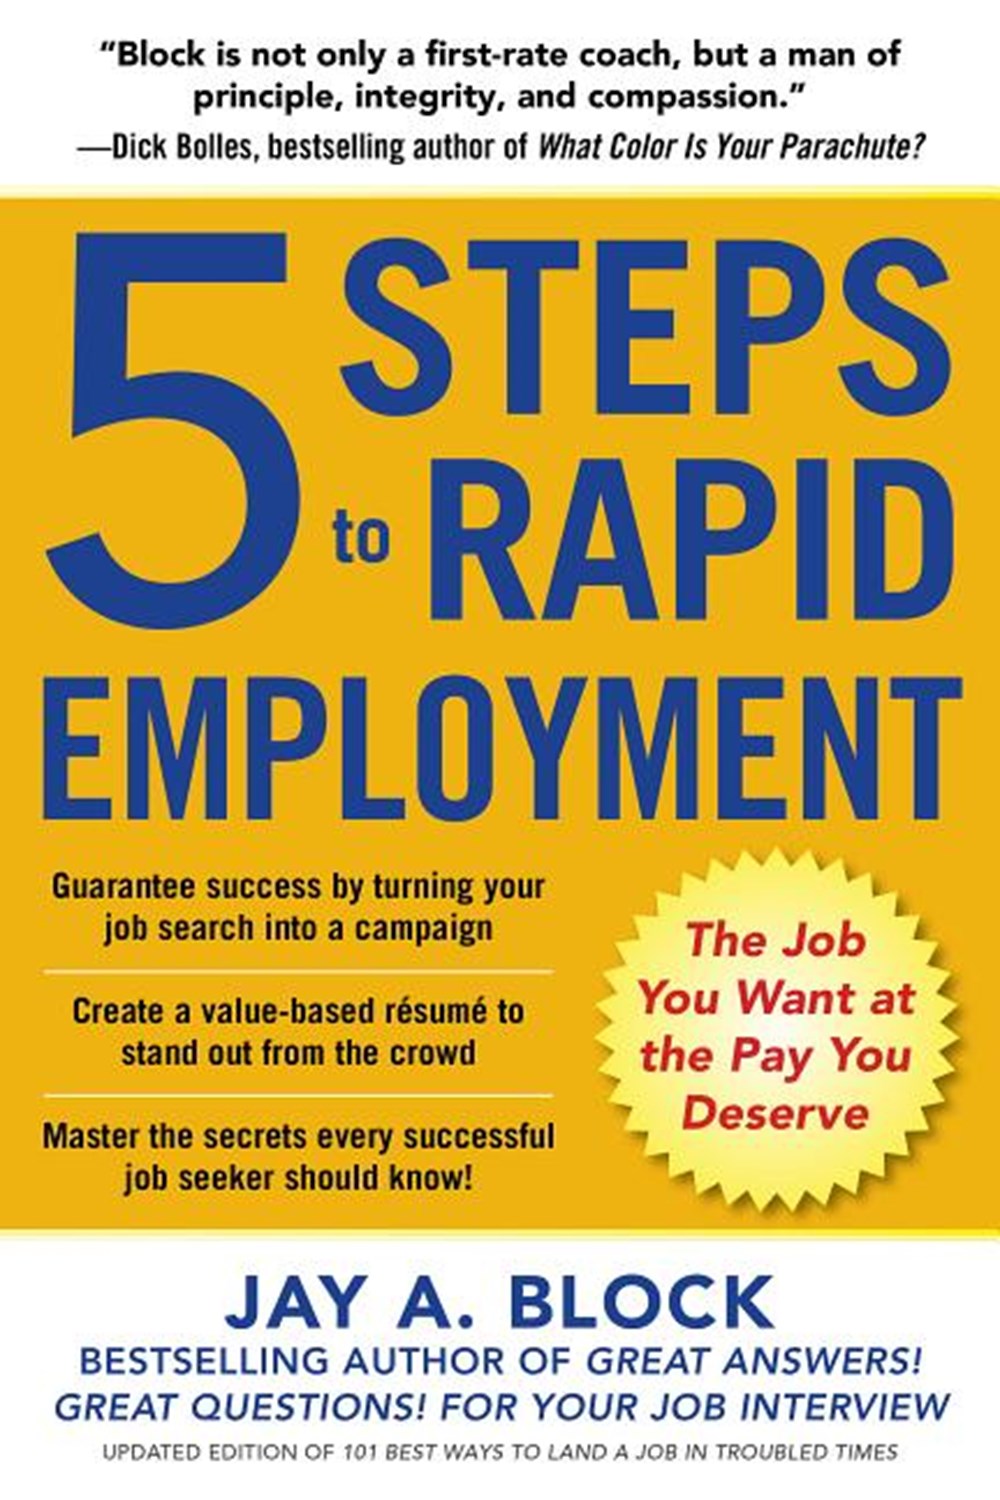 5 Steps to Rapid Employment: The Job You Want at the Pay You Deserve (UK)